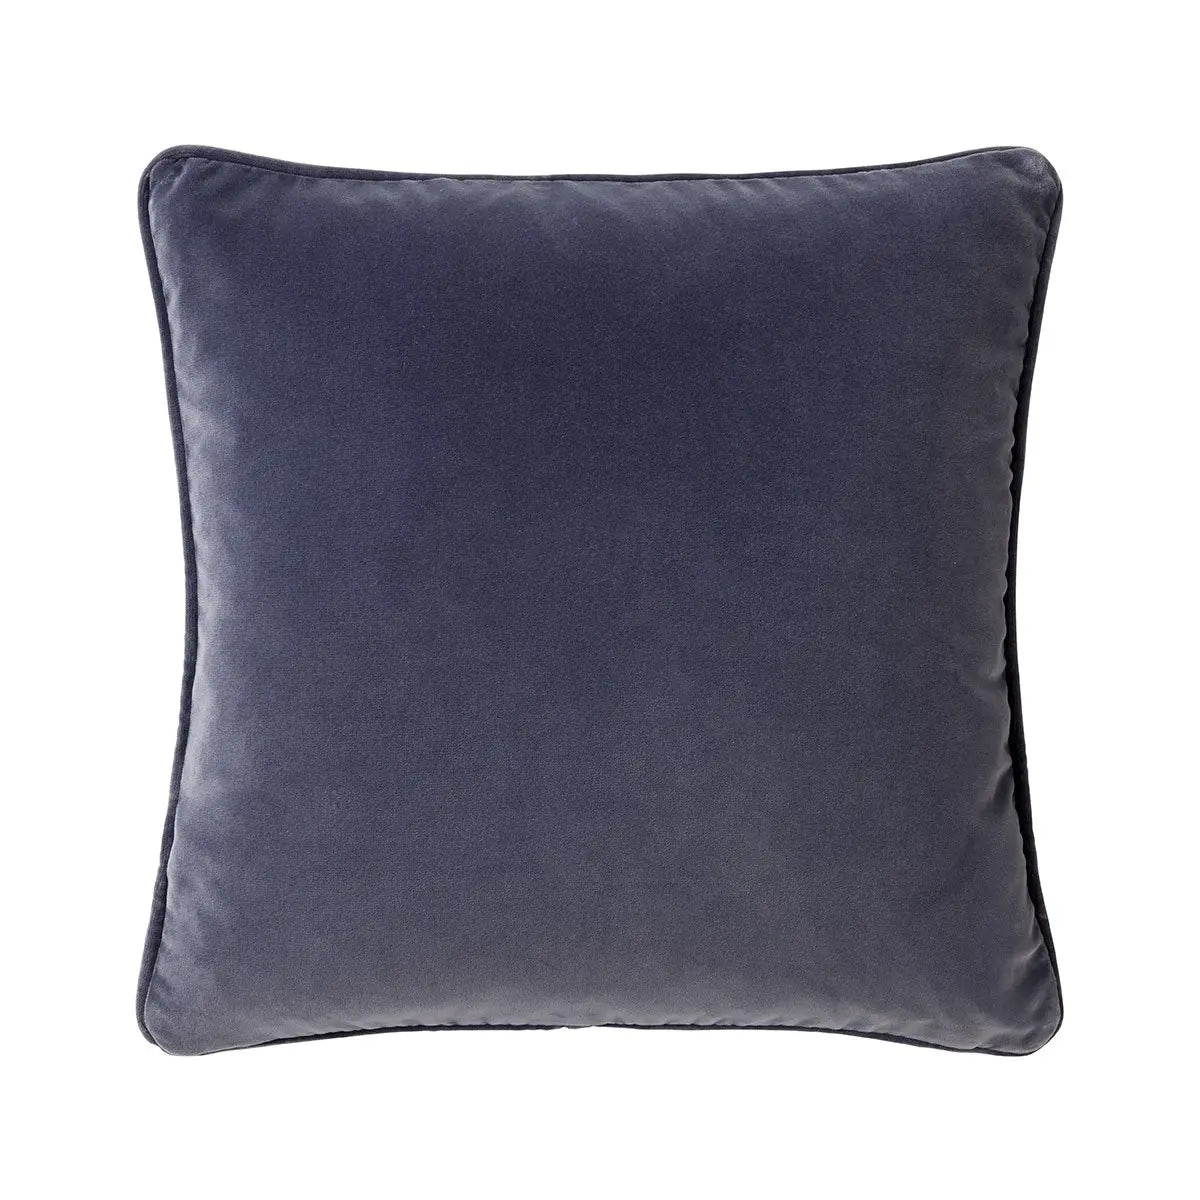 Yves Delorme 18 by 18 Divan Decorative Pillow in Mystere